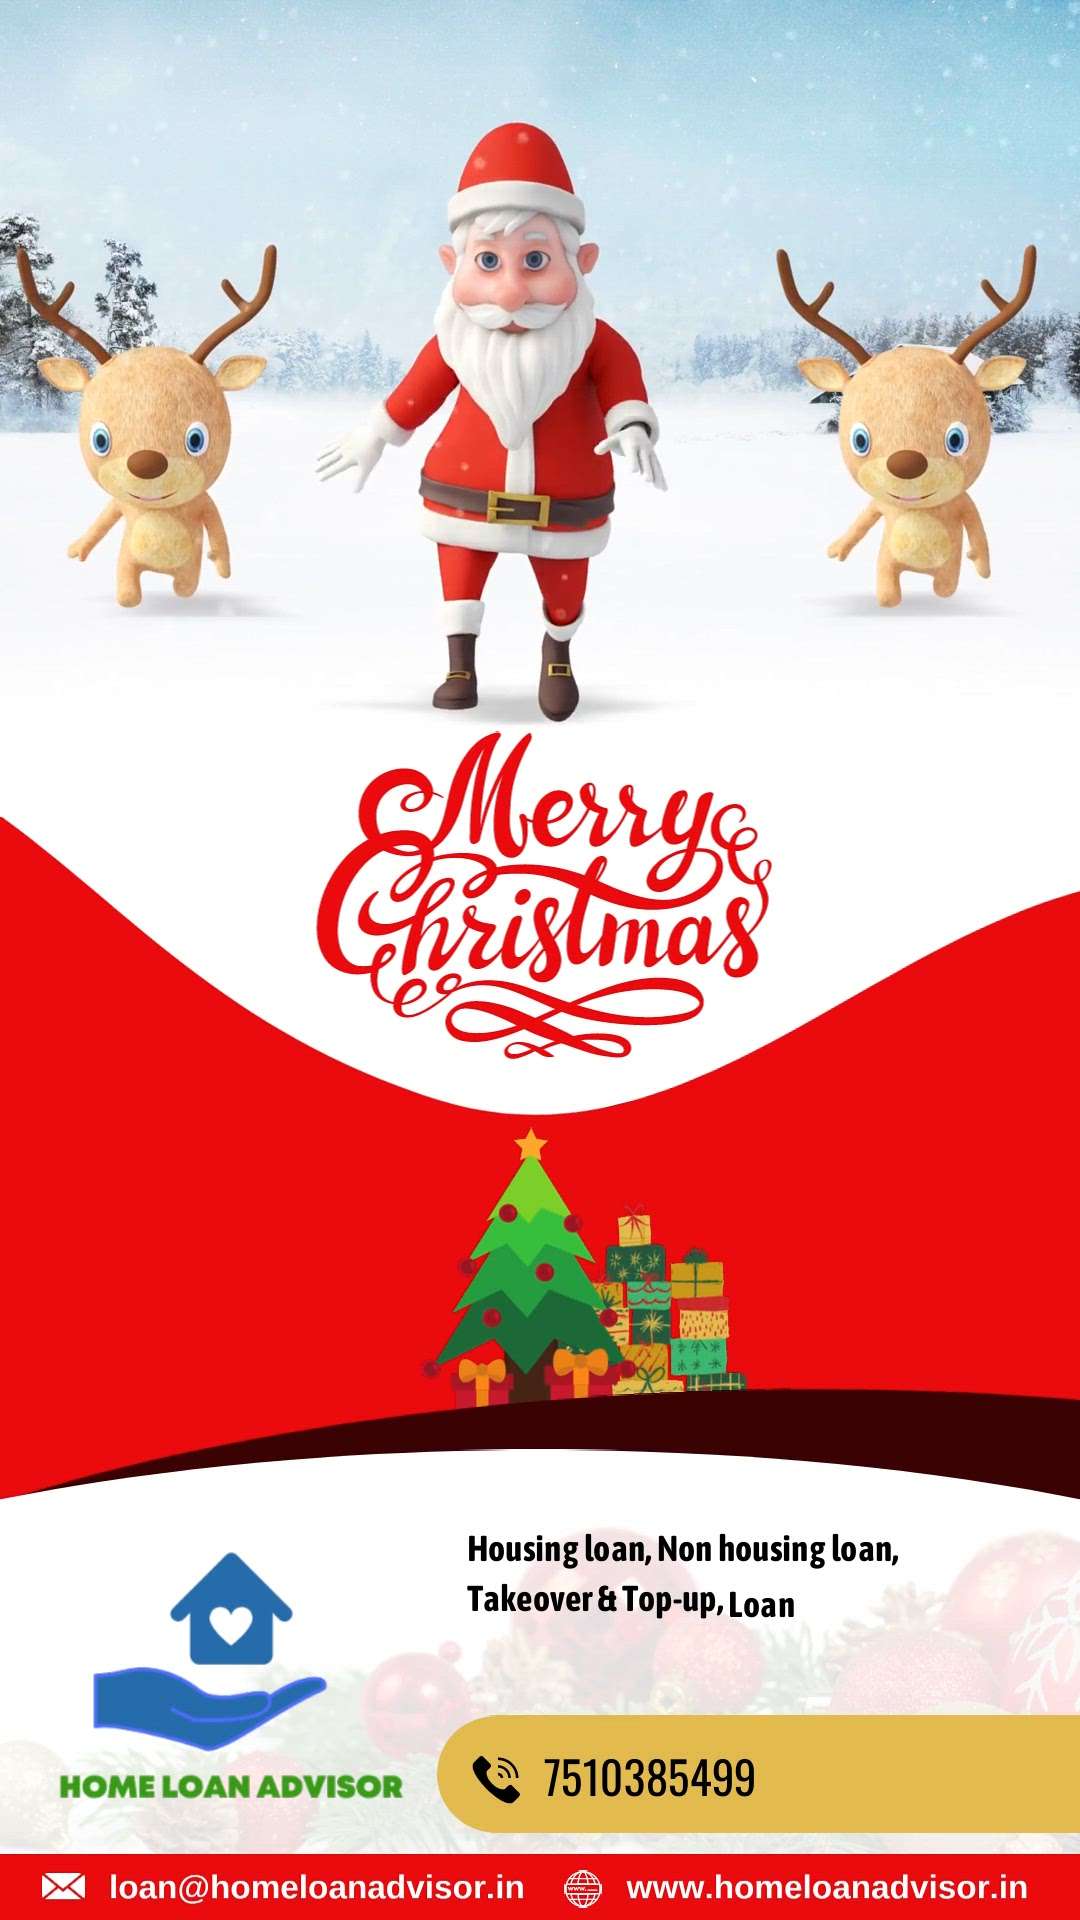 Happiness and Cheer! Christmas time is here! Wishing you a MERRY CHRISTMAS and Happy New Year 2024